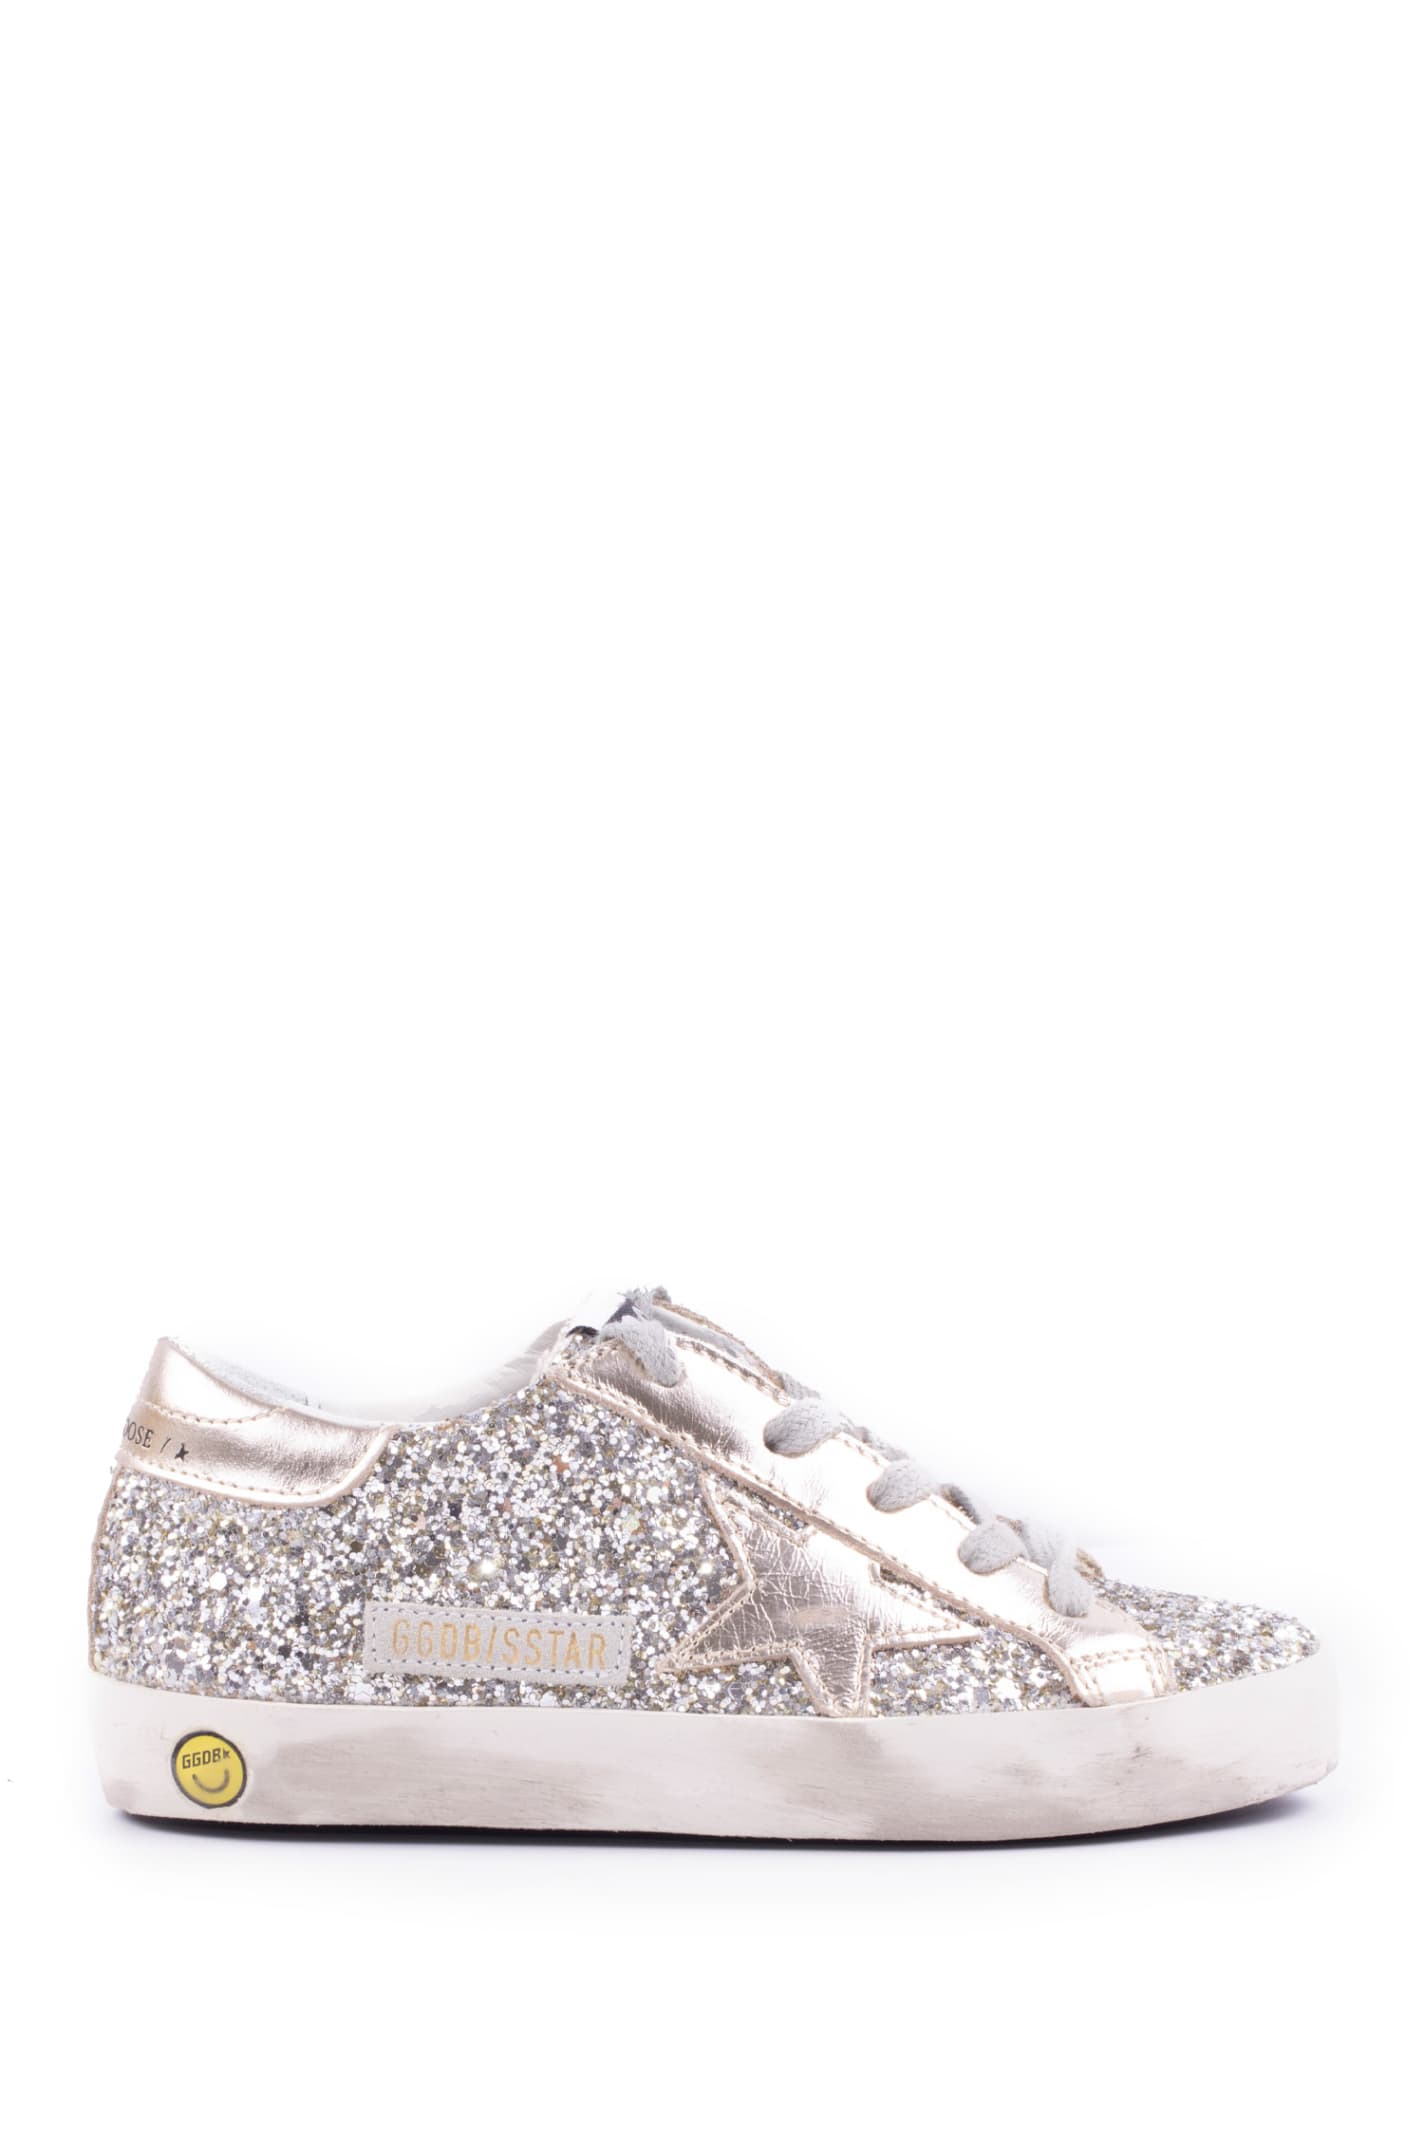 GOLDEN GOOSE SUPER-STAR SNEAKERS WITH GLITTER